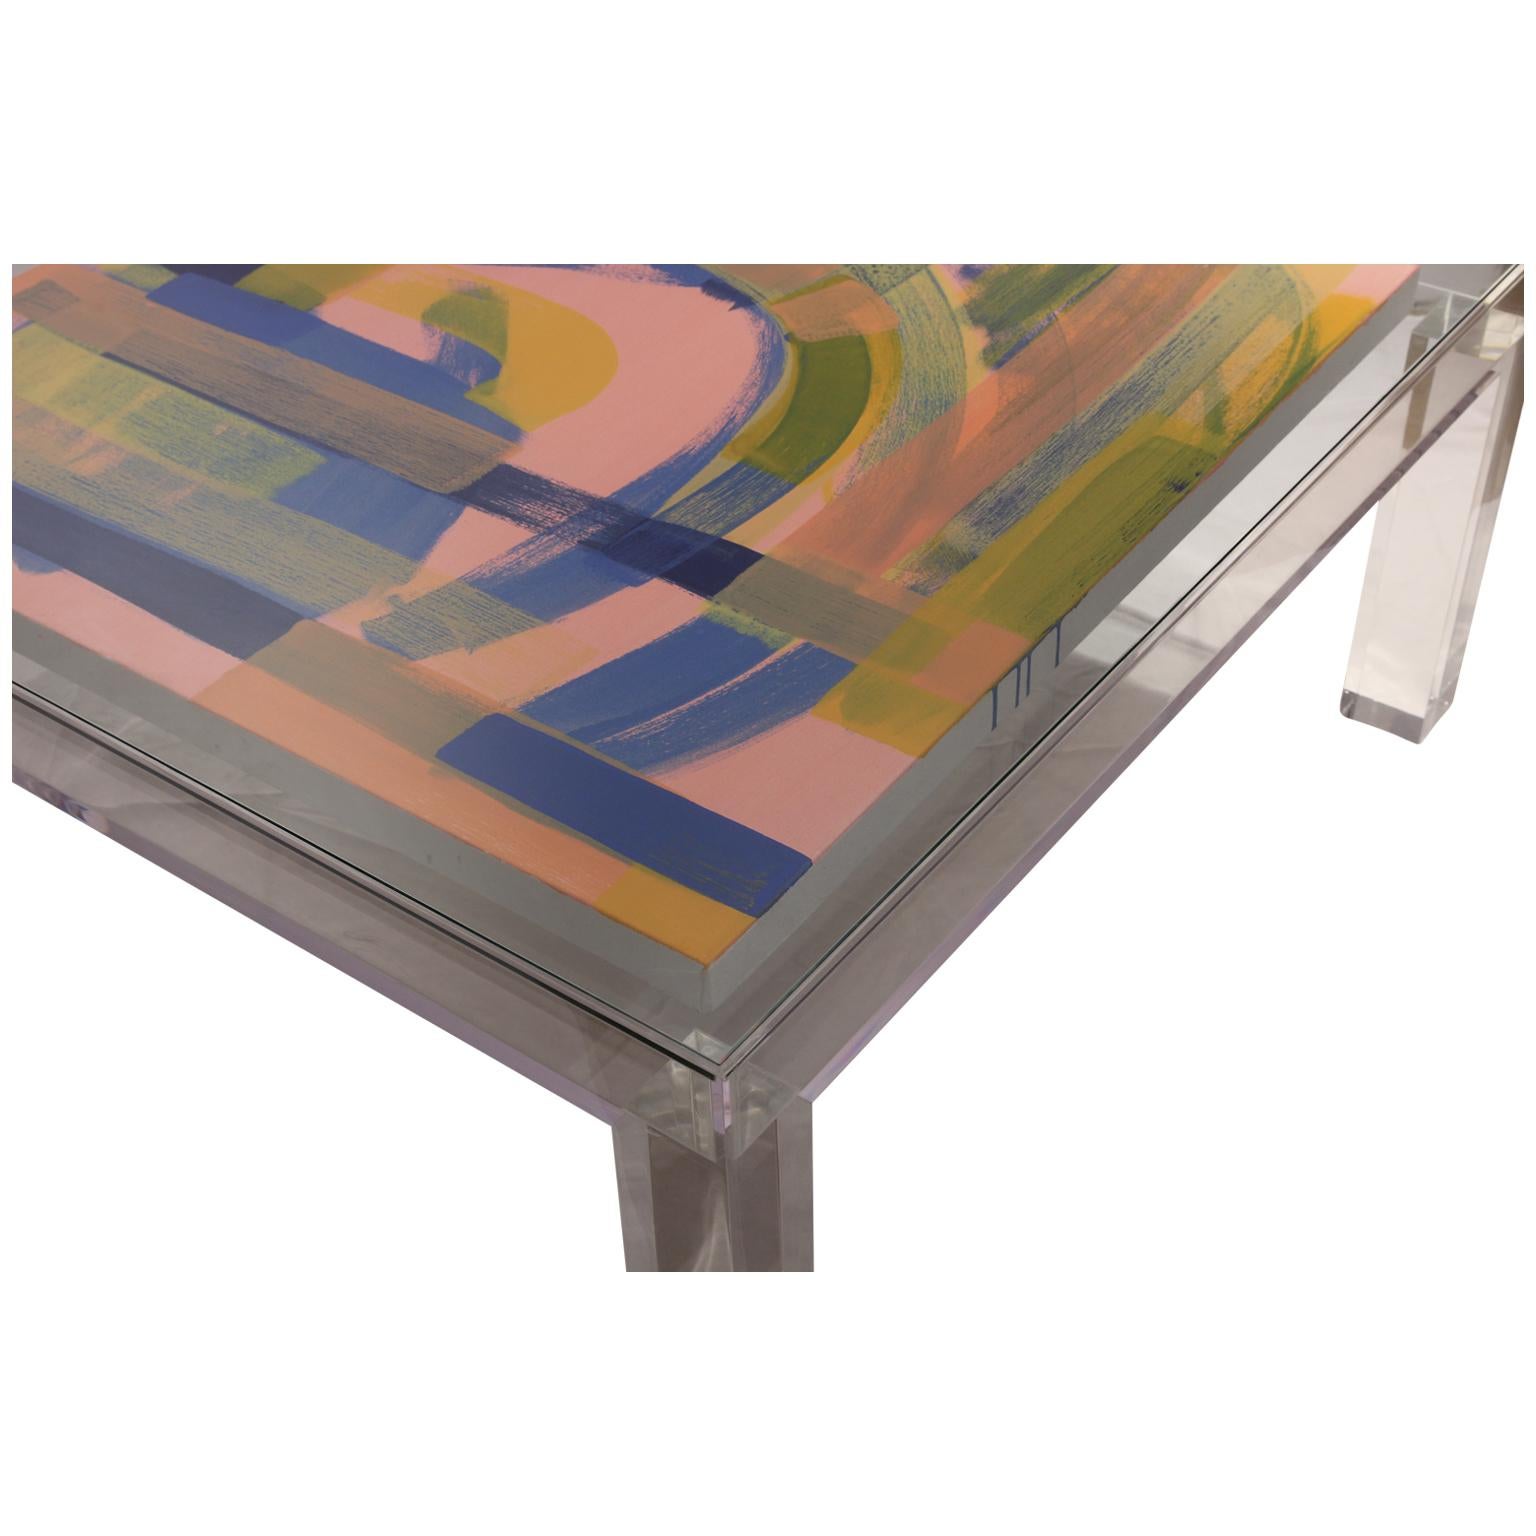 Custom made Lucite coffee table or center table with a removeable glass top. The inside of the table allows for displaying art or other desired objects.
Inside table dimensions: H 39 in x W 39 in x D 2.5 in.